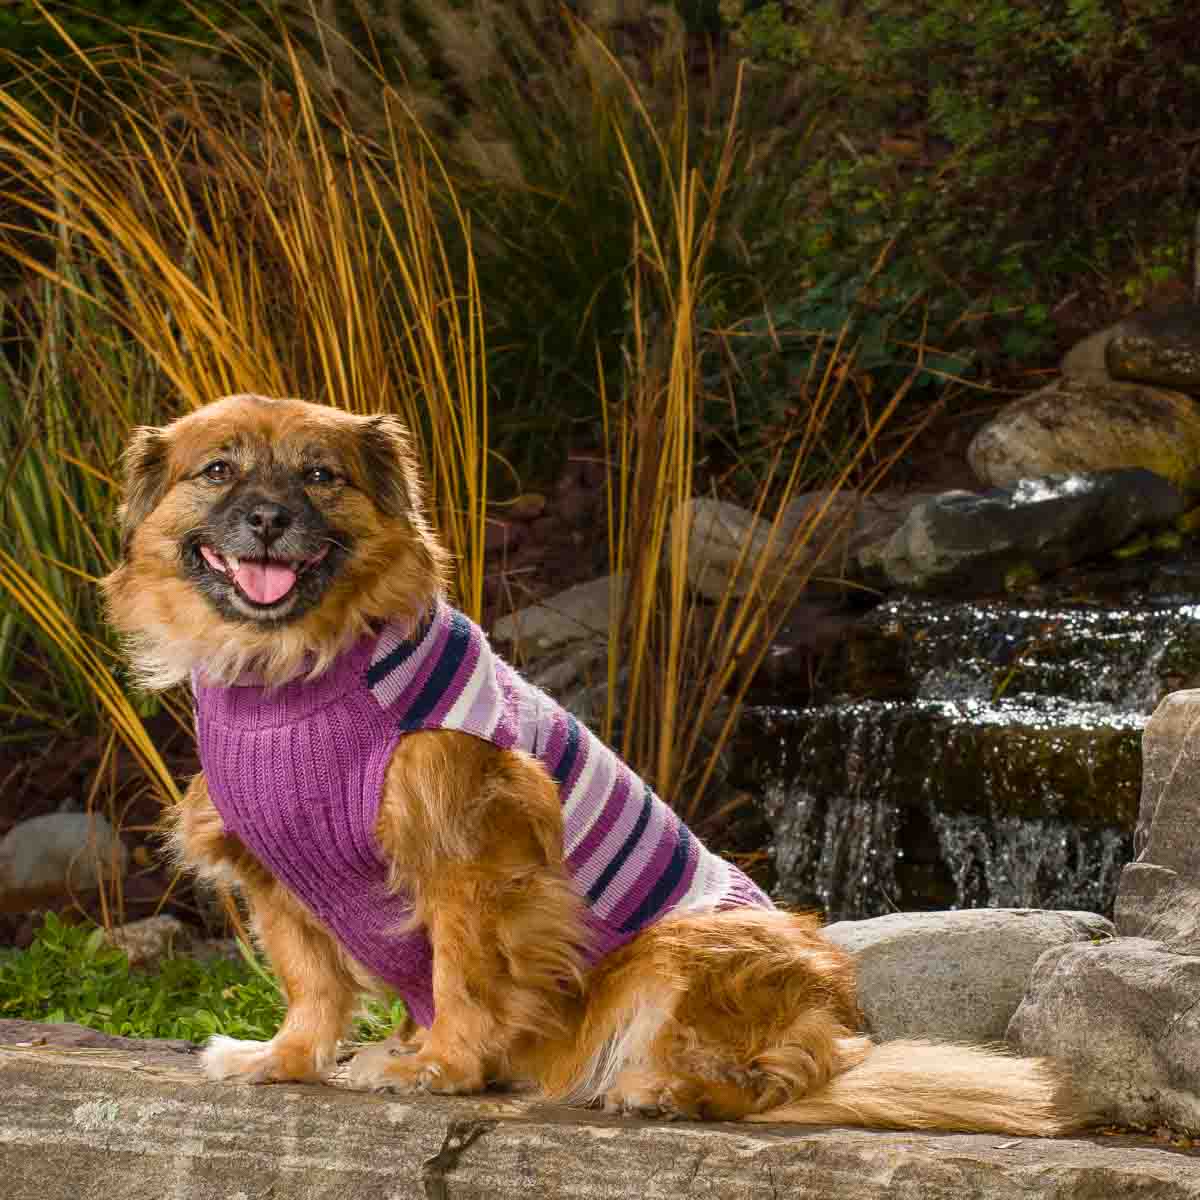 A dog wearing a sweater sitting on the ground.